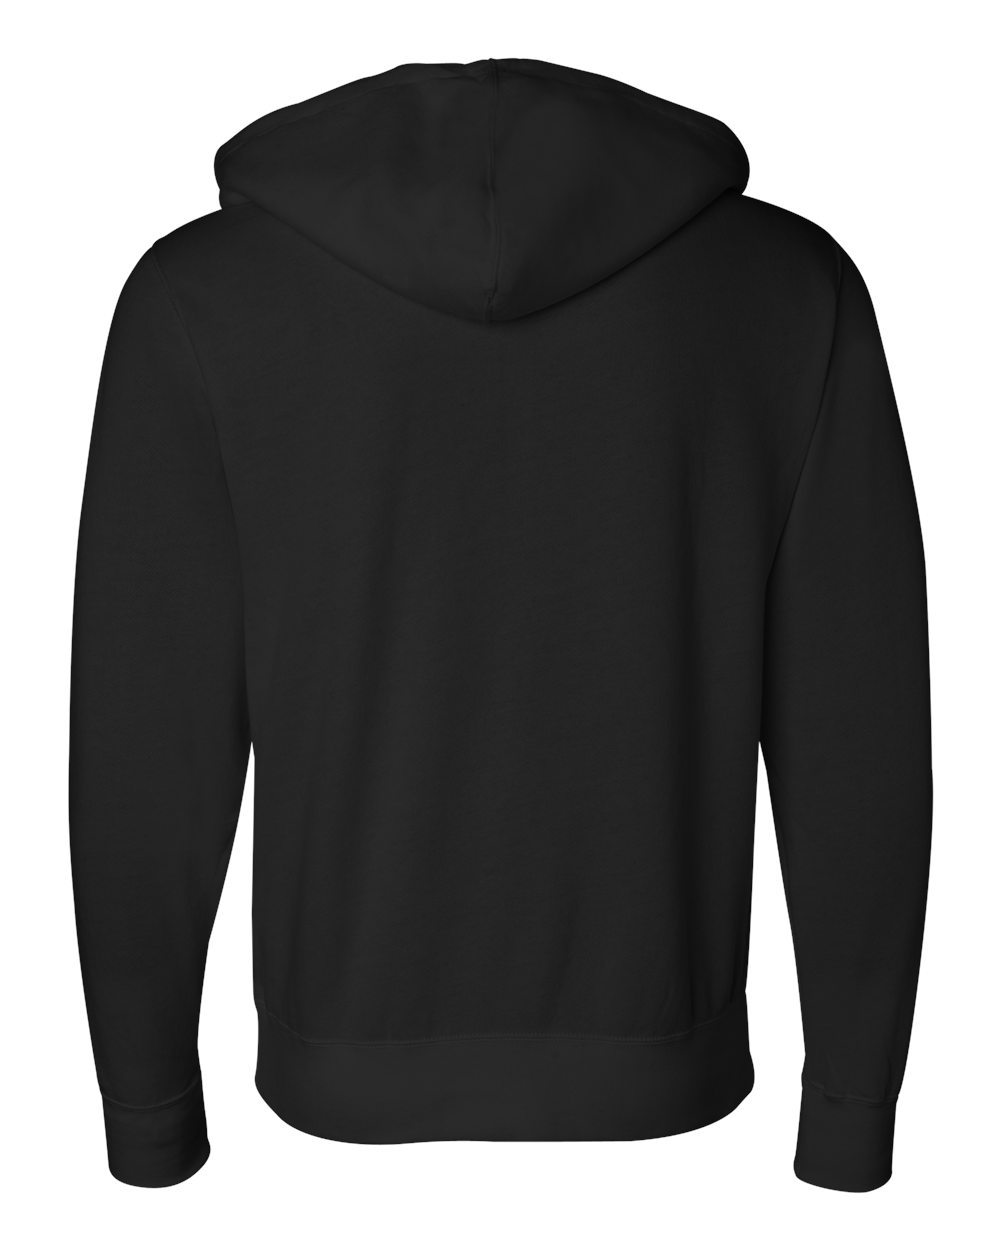 Independent Trading Co Full-Zip Hooded Sweatshirt Blank AFX4000Z up to ...